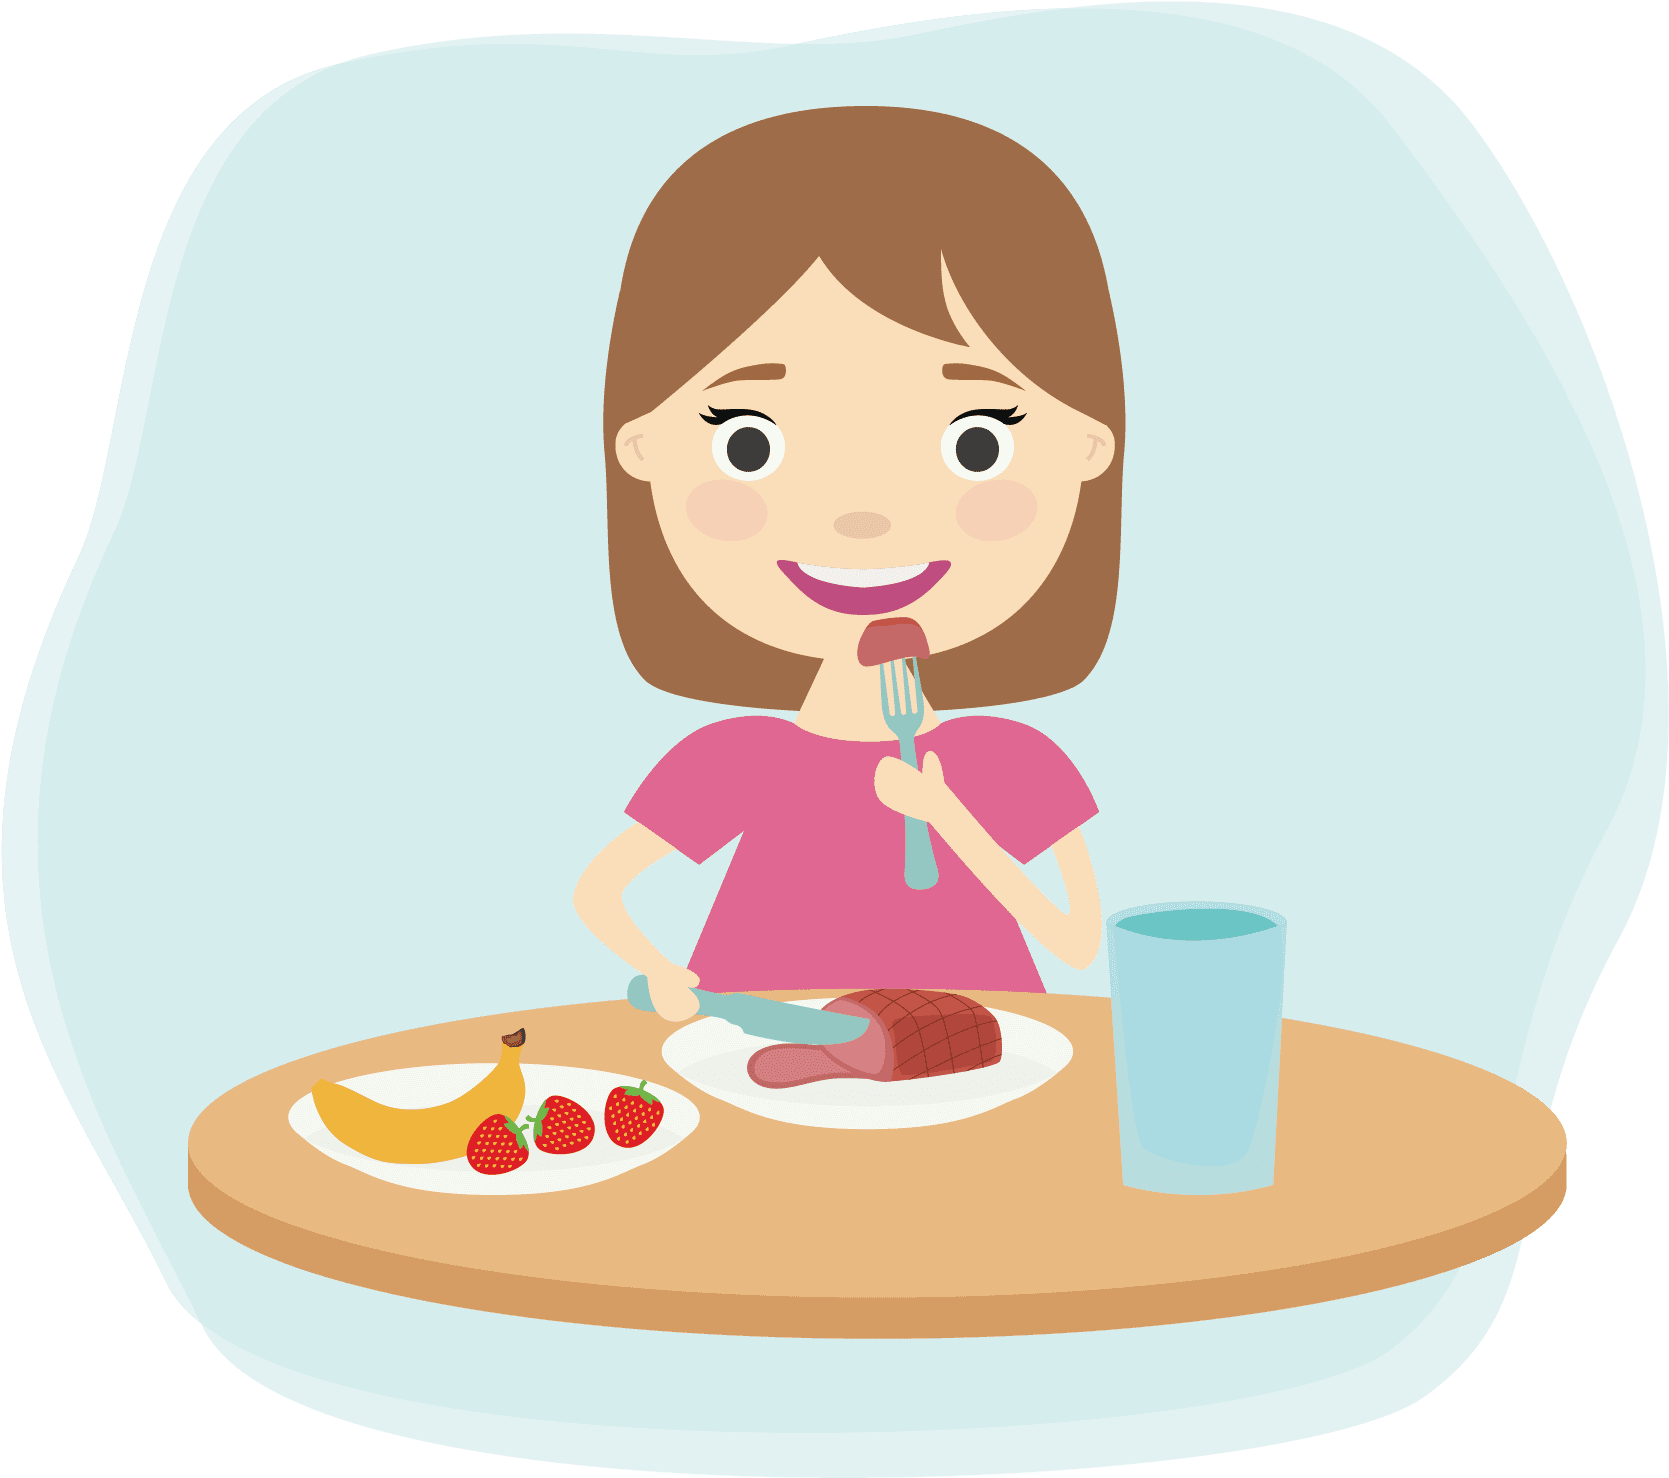 Breakfast eating child clipart healthy picture